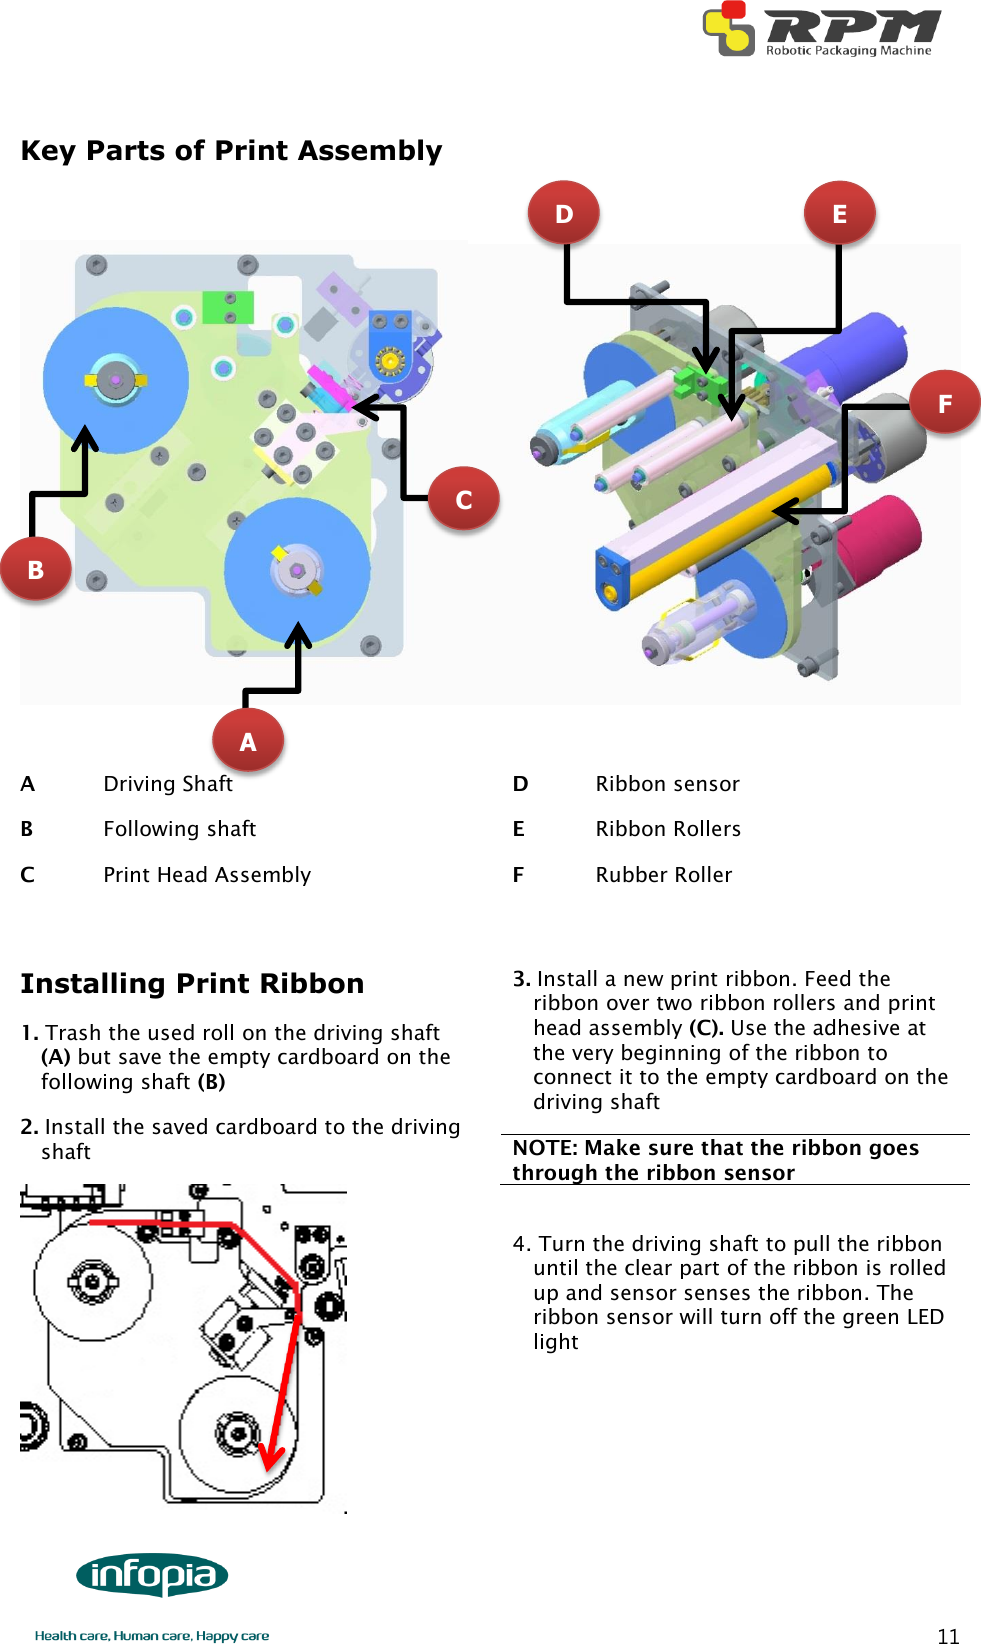       11 Key Parts of Print Assembly     A    Driving Shaft B    Following shaft C  Print Head Assembly D  Ribbon sensor E    Ribbon Rollers F  Rubber Roller  Installing Print Ribbon 1. Trash the used roll on the driving shaft (A) but save the empty cardboard on the following shaft (B) 2. Install the saved cardboard to the driving shaft  3. Install a new print ribbon. Feed the ribbon over two ribbon rollers and print head assembly (C). Use the adhesive at the very beginning of the ribbon to connect it to the empty cardboard on the driving shaft NOTE: Make sure that the ribbon goes through the ribbon sensor  4. Turn the driving shaft to pull the ribbon until the clear part of the ribbon is rolled up and sensor senses the ribbon. The ribbon sensor will turn off the green LED light    A B C D F E 